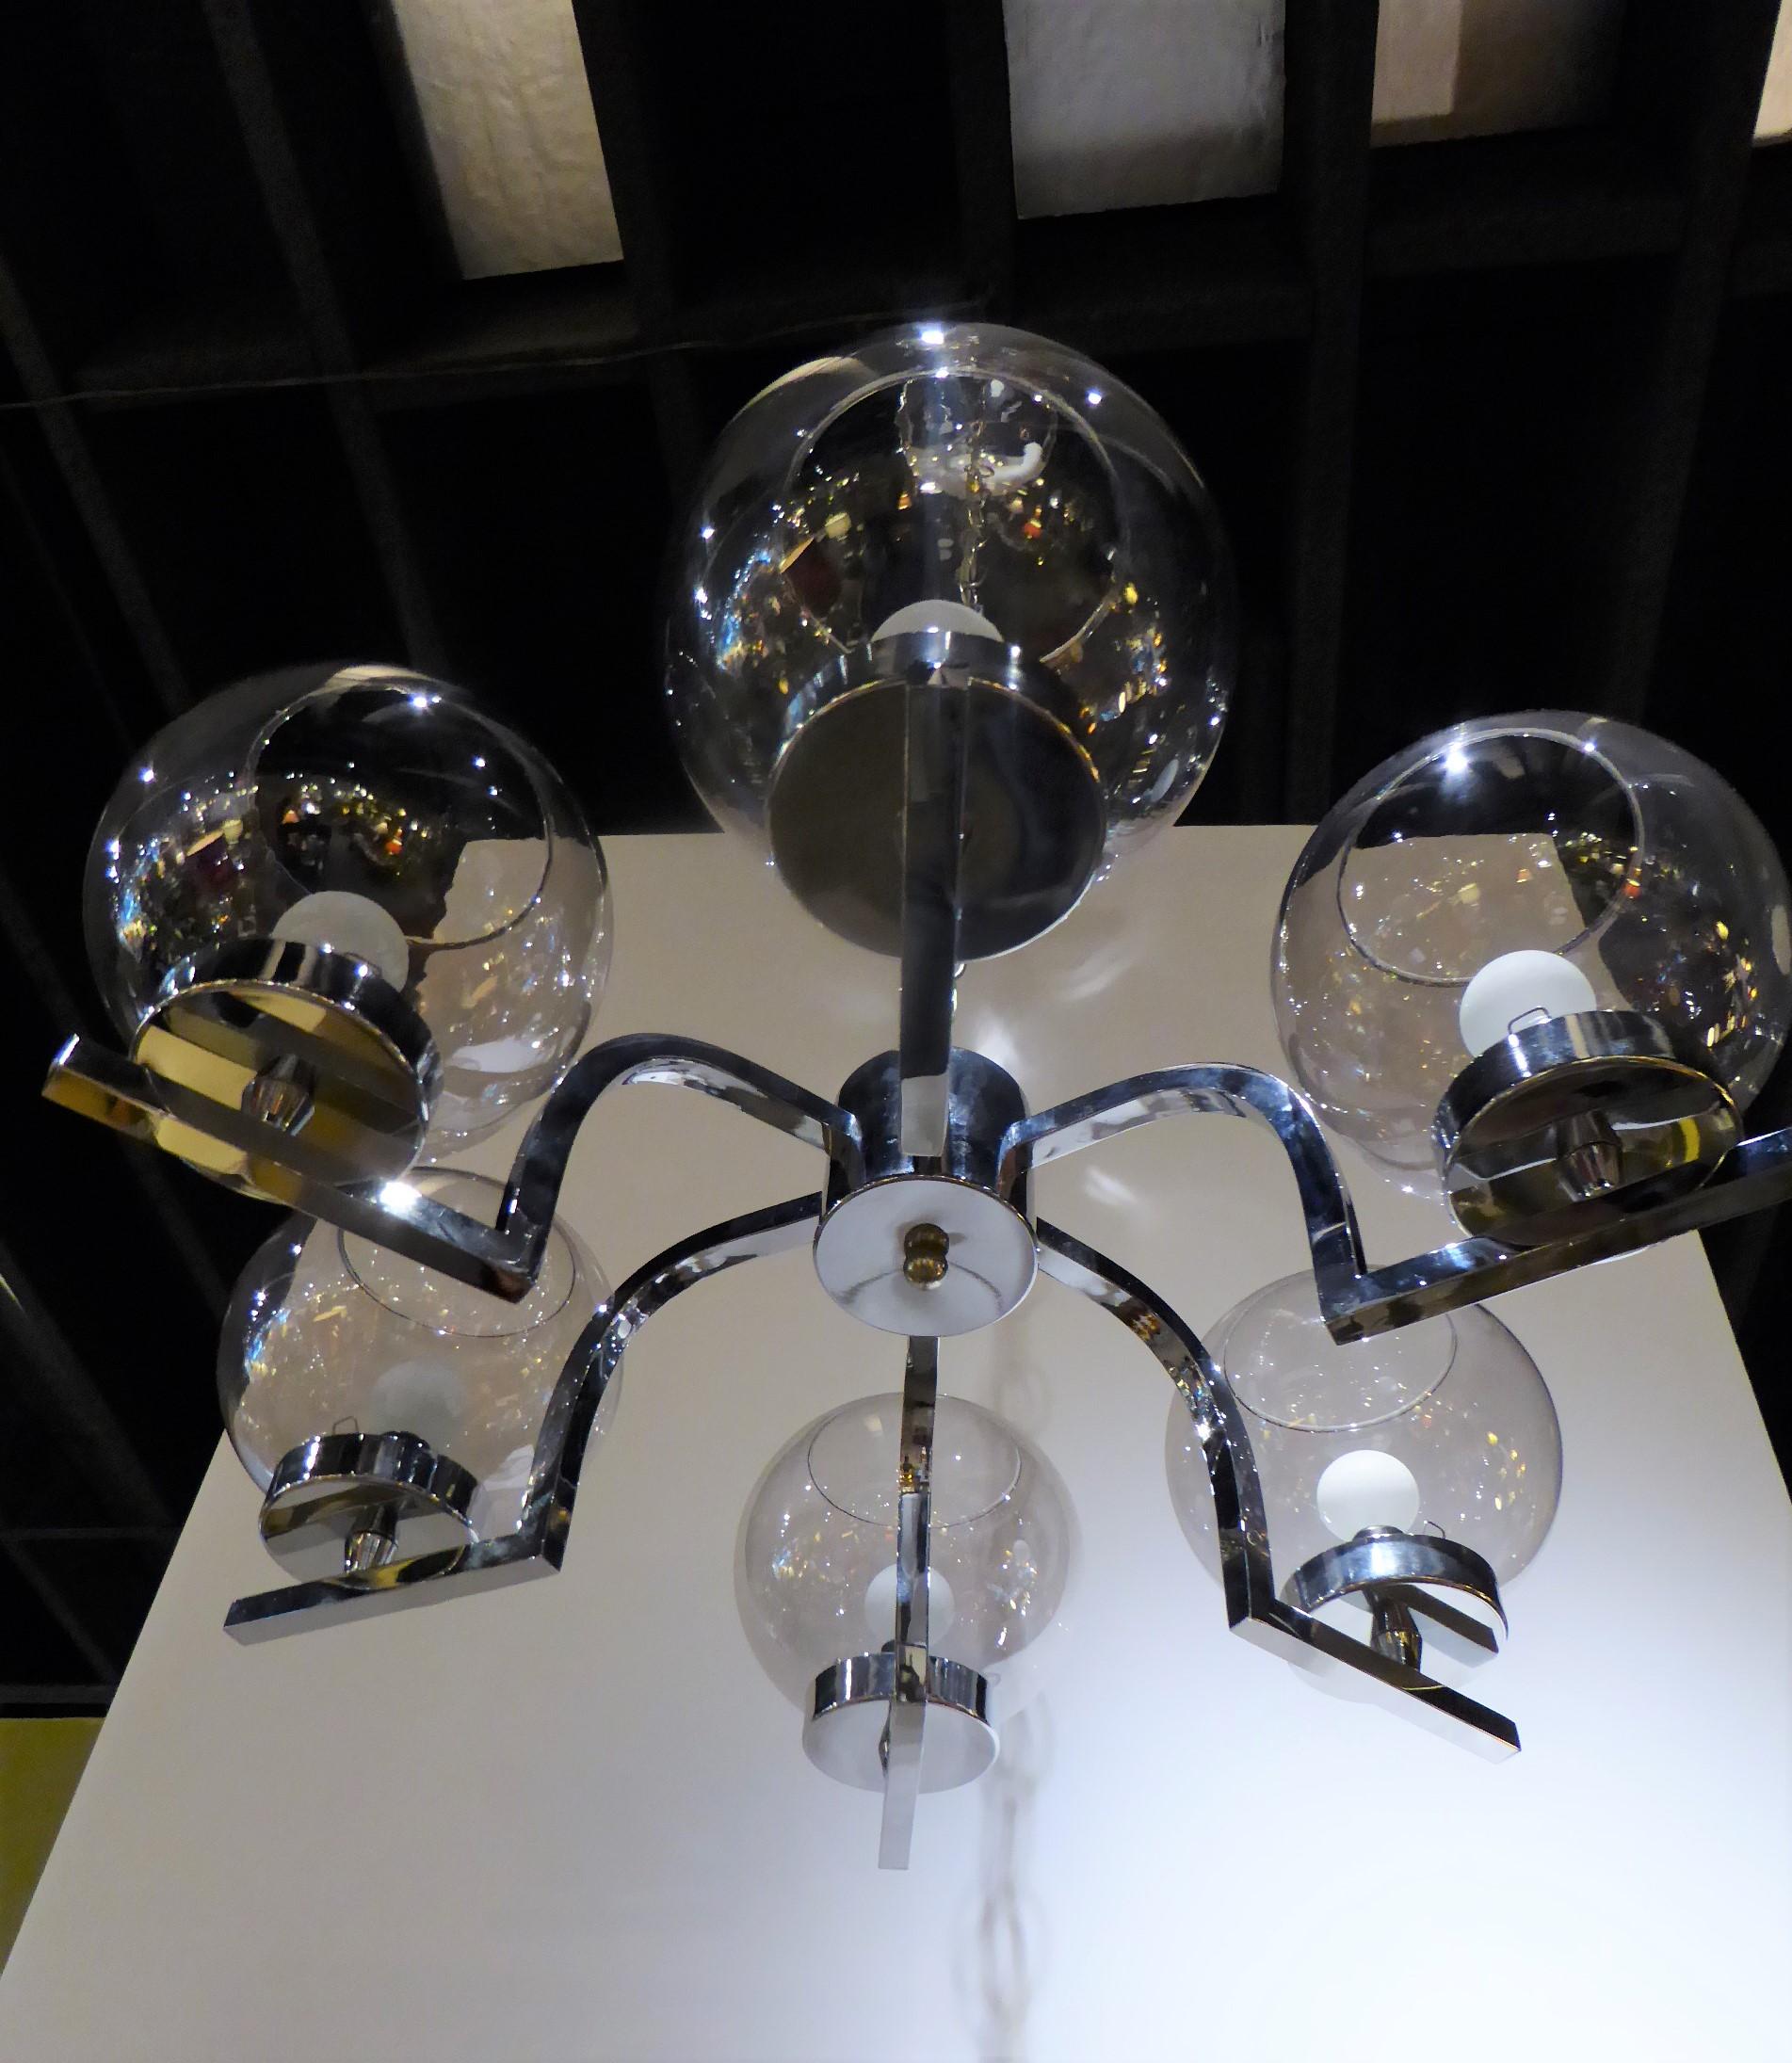 A 1960s chrome and smoked glass ball globe six-light chandelier with a radiating star or spider shape, down turning and out arms ending under blown smoked glass ball shaped globes. Bright and shiny chrome throughout, rewired and with new UL sockets.